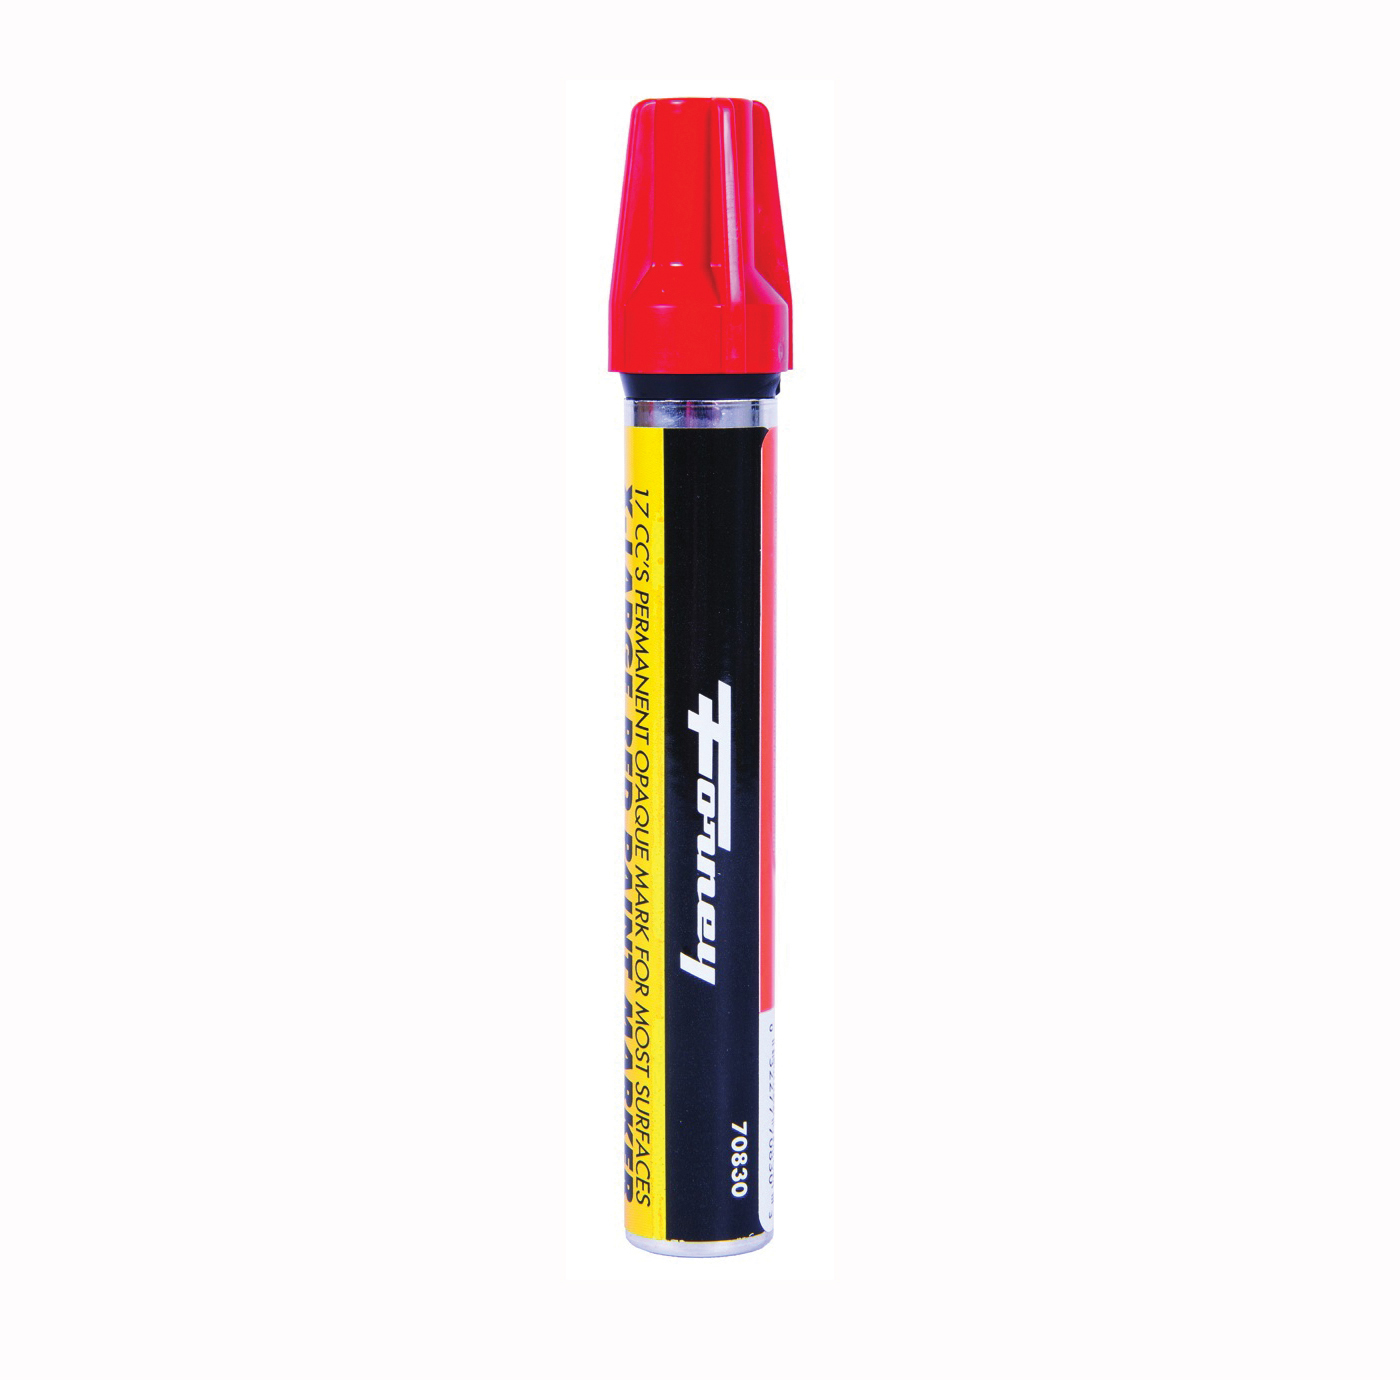 Forney 70830 Paint Marker, XL Tip, Red